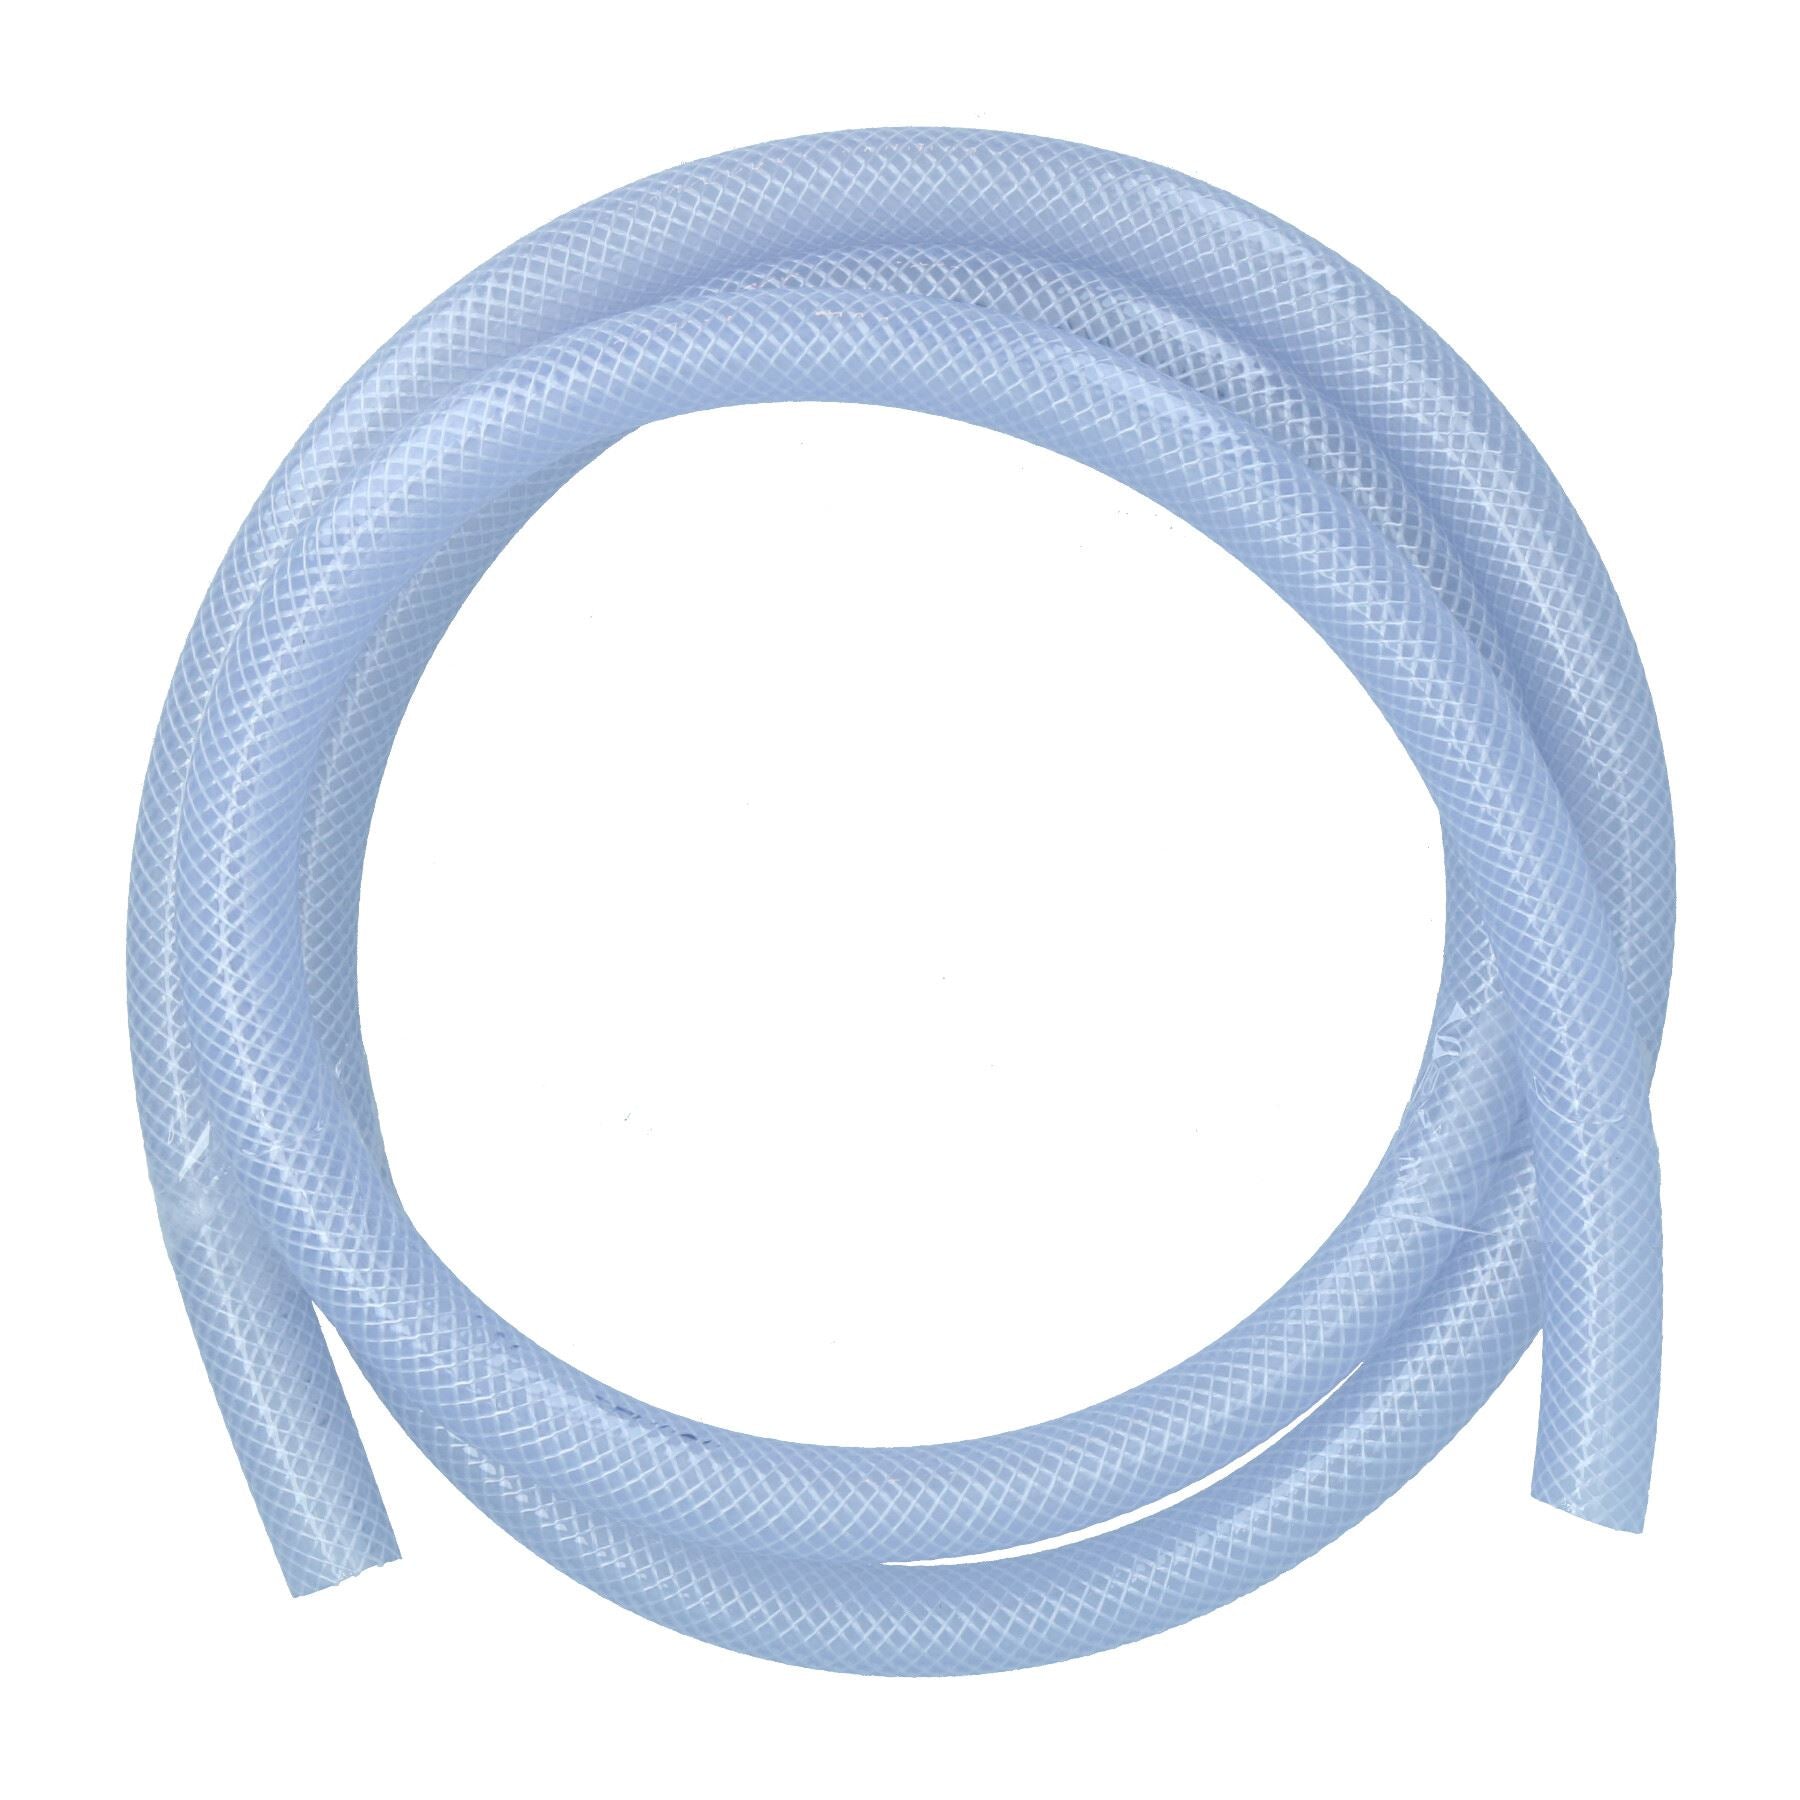 2m Reinforced PVC Clear Water Hose 3/4" (19mm) for Bilge Pump Food Quality